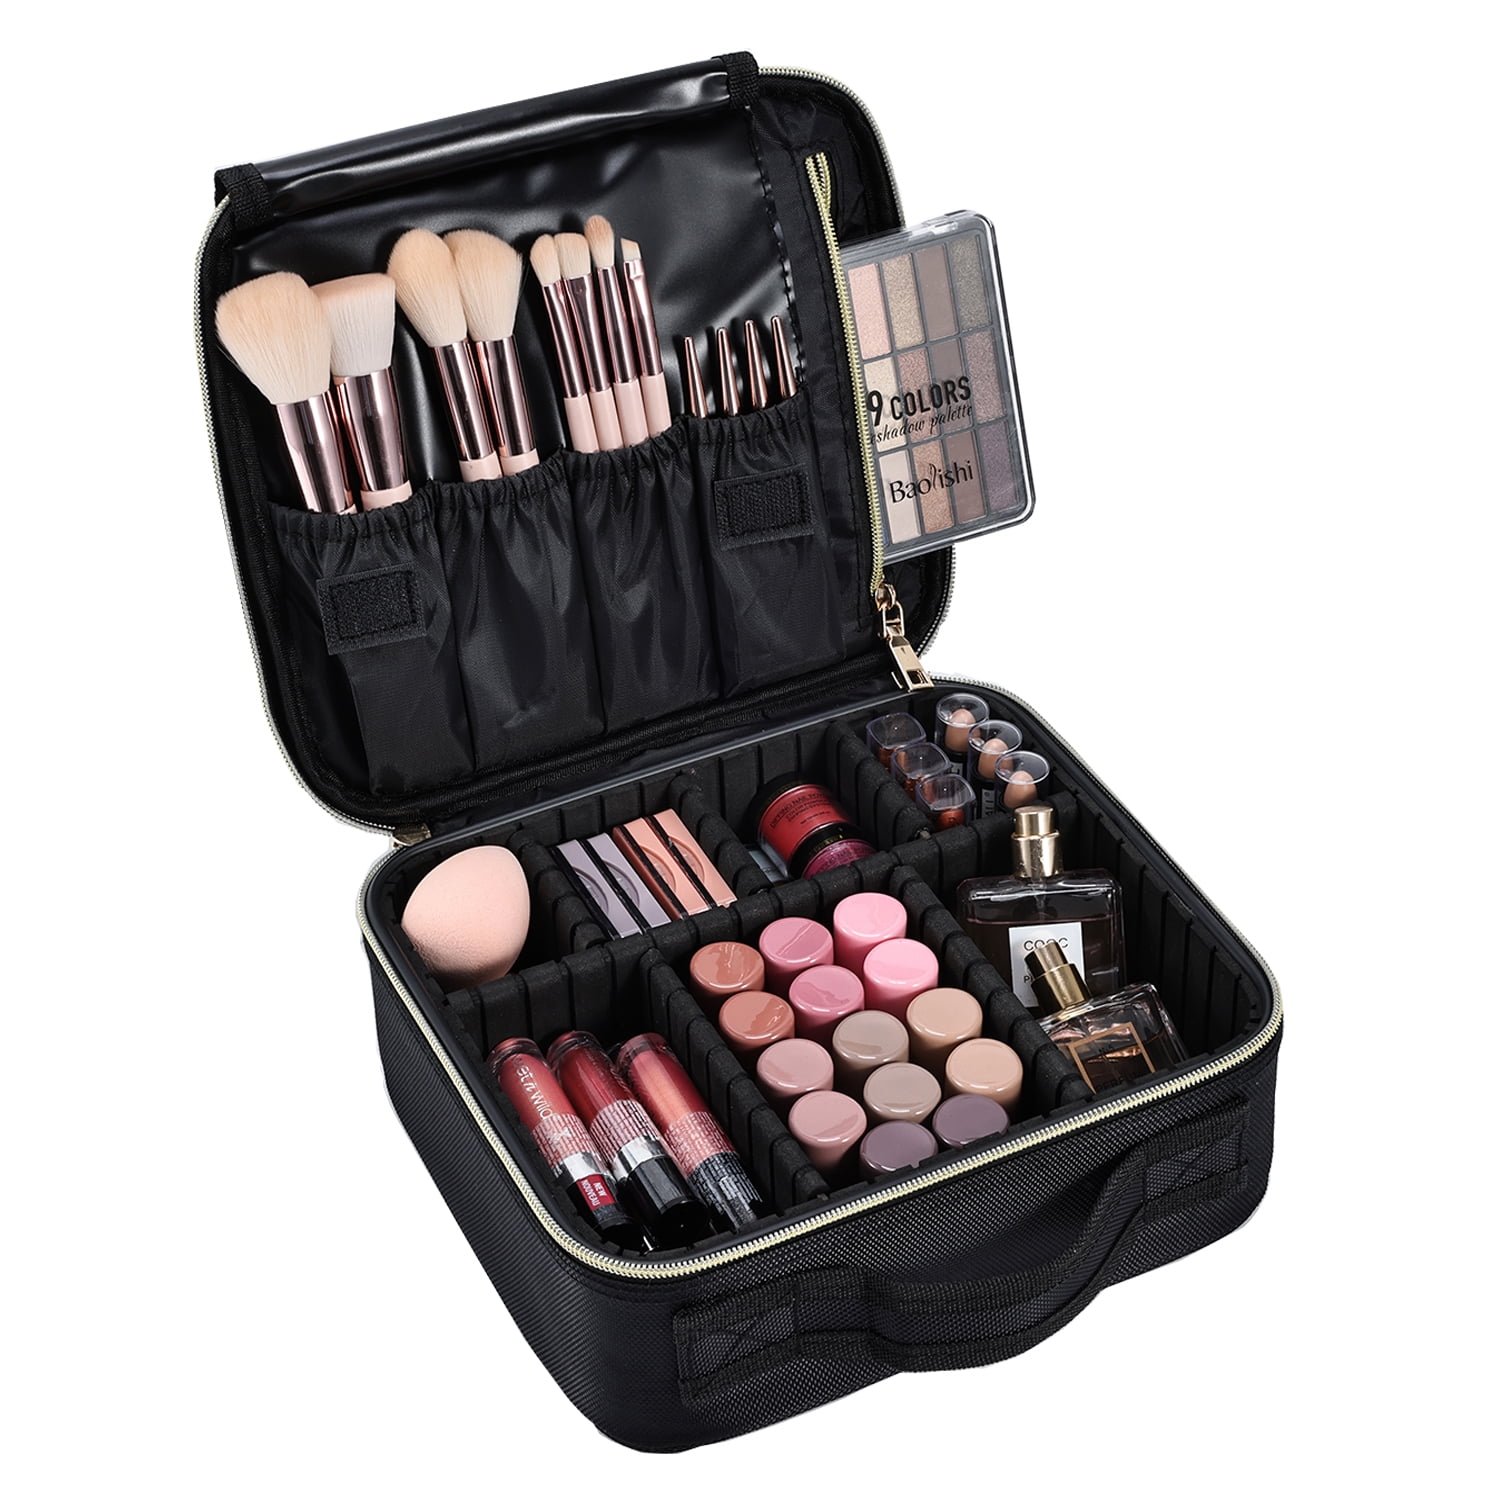 Travel Makeup Bag for Women Cosmetic Train Case Organizer with ...